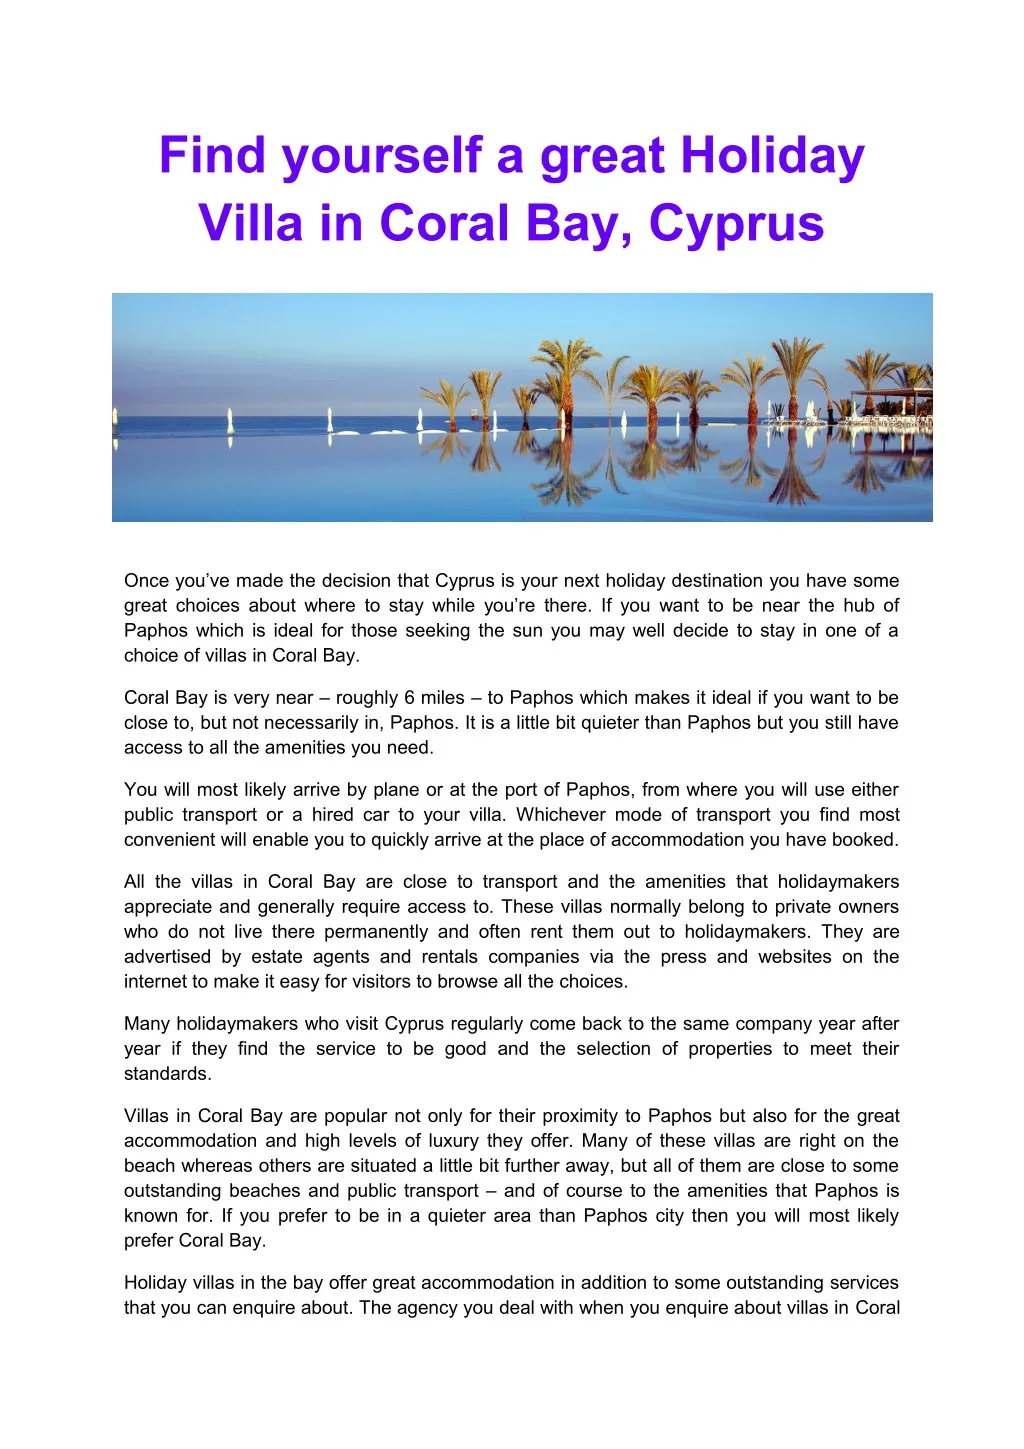 find yourself a great holiday villa in coral